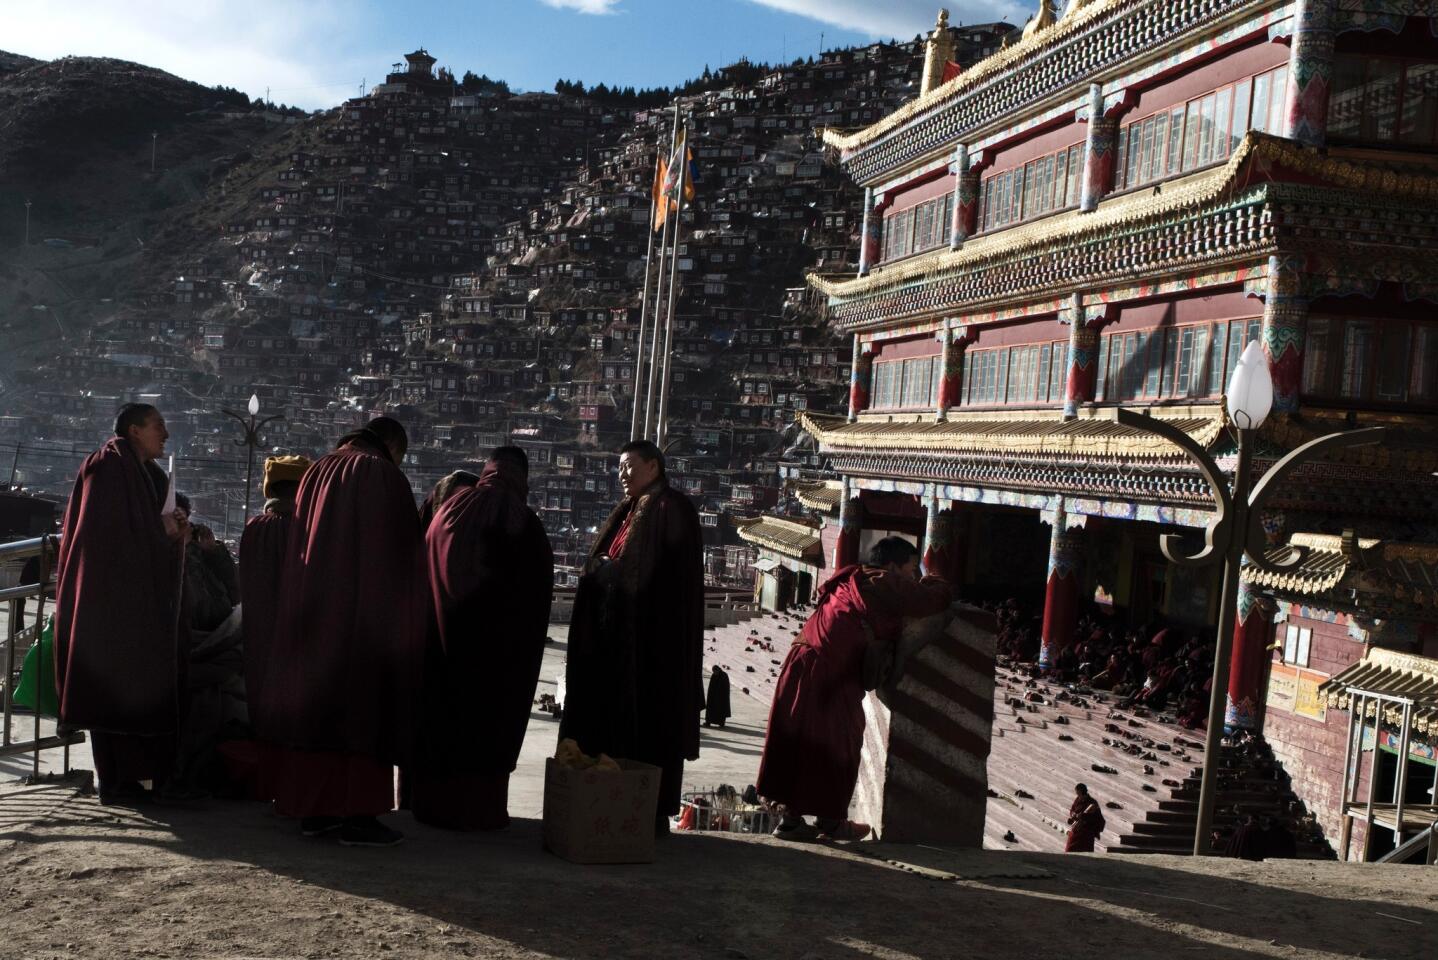 Buddhist nuns gather at the Larung Gar Buddhist Institute, where up to 40,000 monks and nuns are in residence for parts of the year. A notice from local officials began circulating in recent months saying that Larung Gar’s population must be reduced to no more than 5,000 residents by Sept. 30.